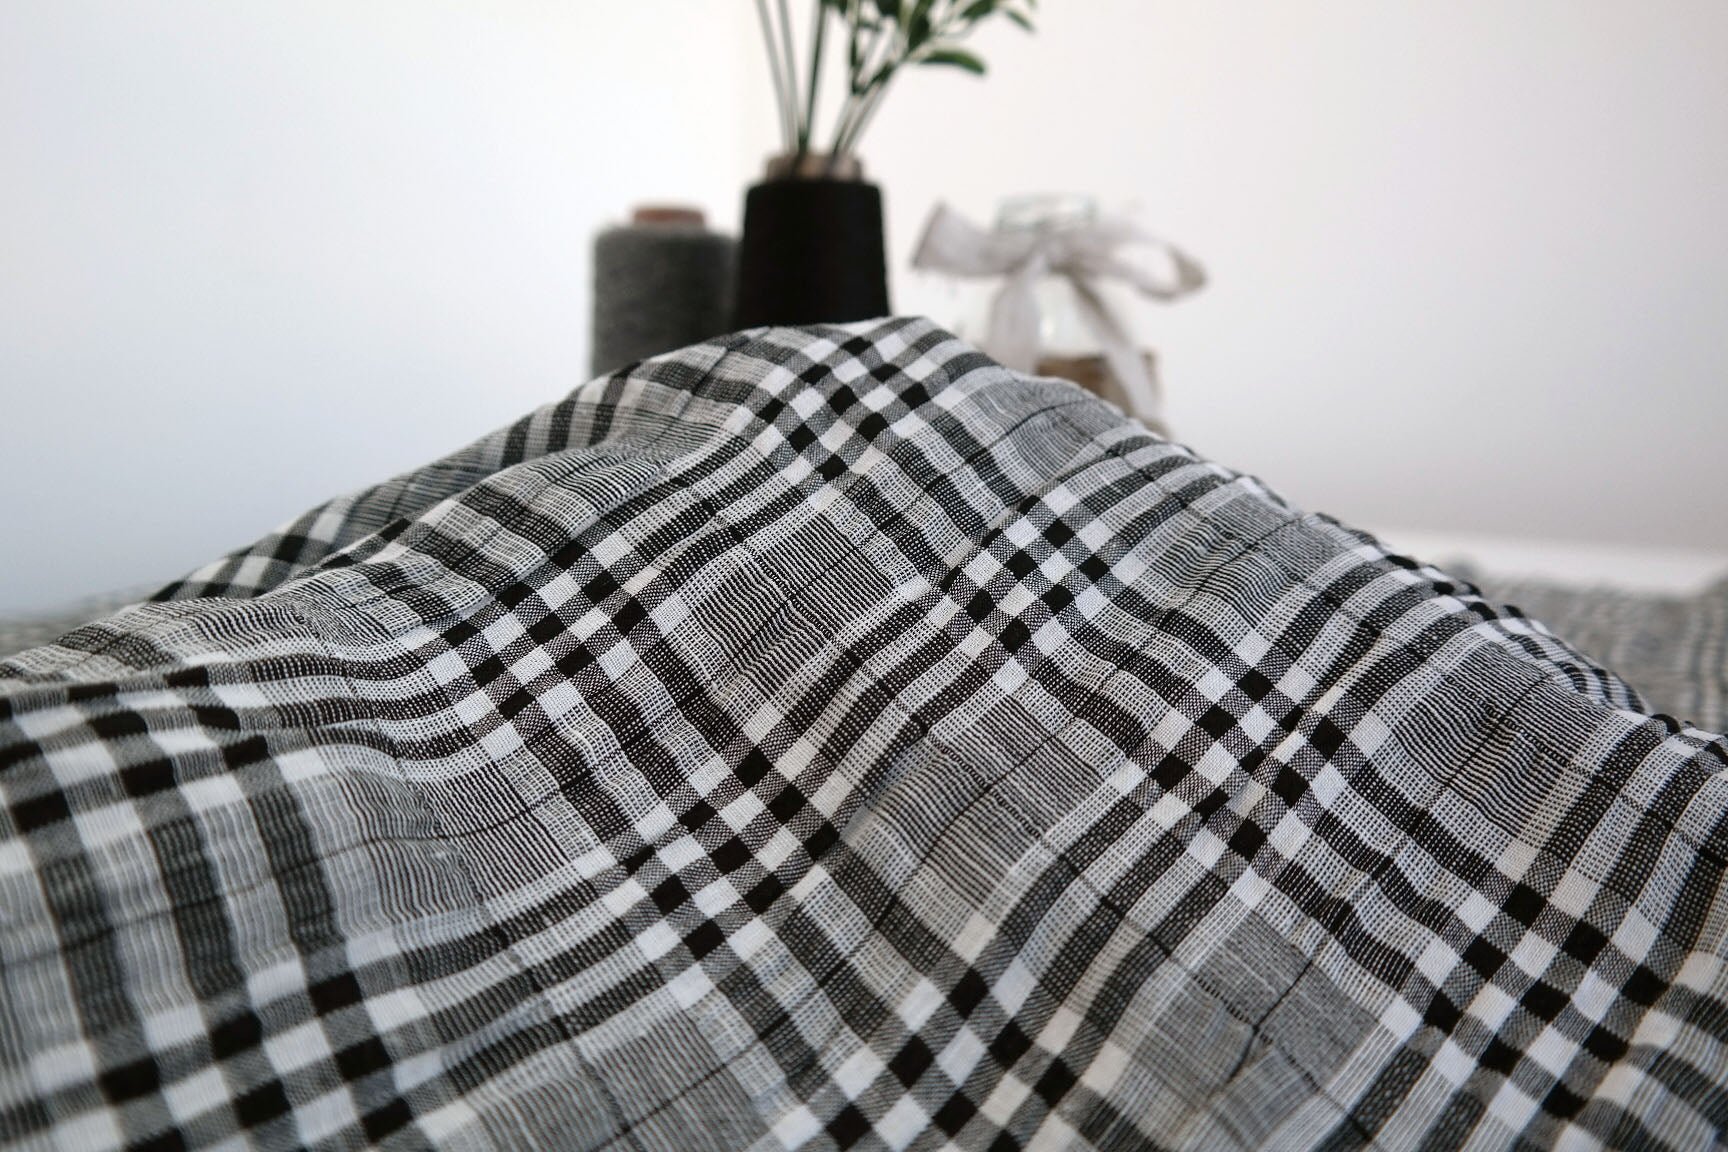 Linen Rayon Plaid Stretch Wrinkled Fabric (6713) - The Linen Lab - White and Black